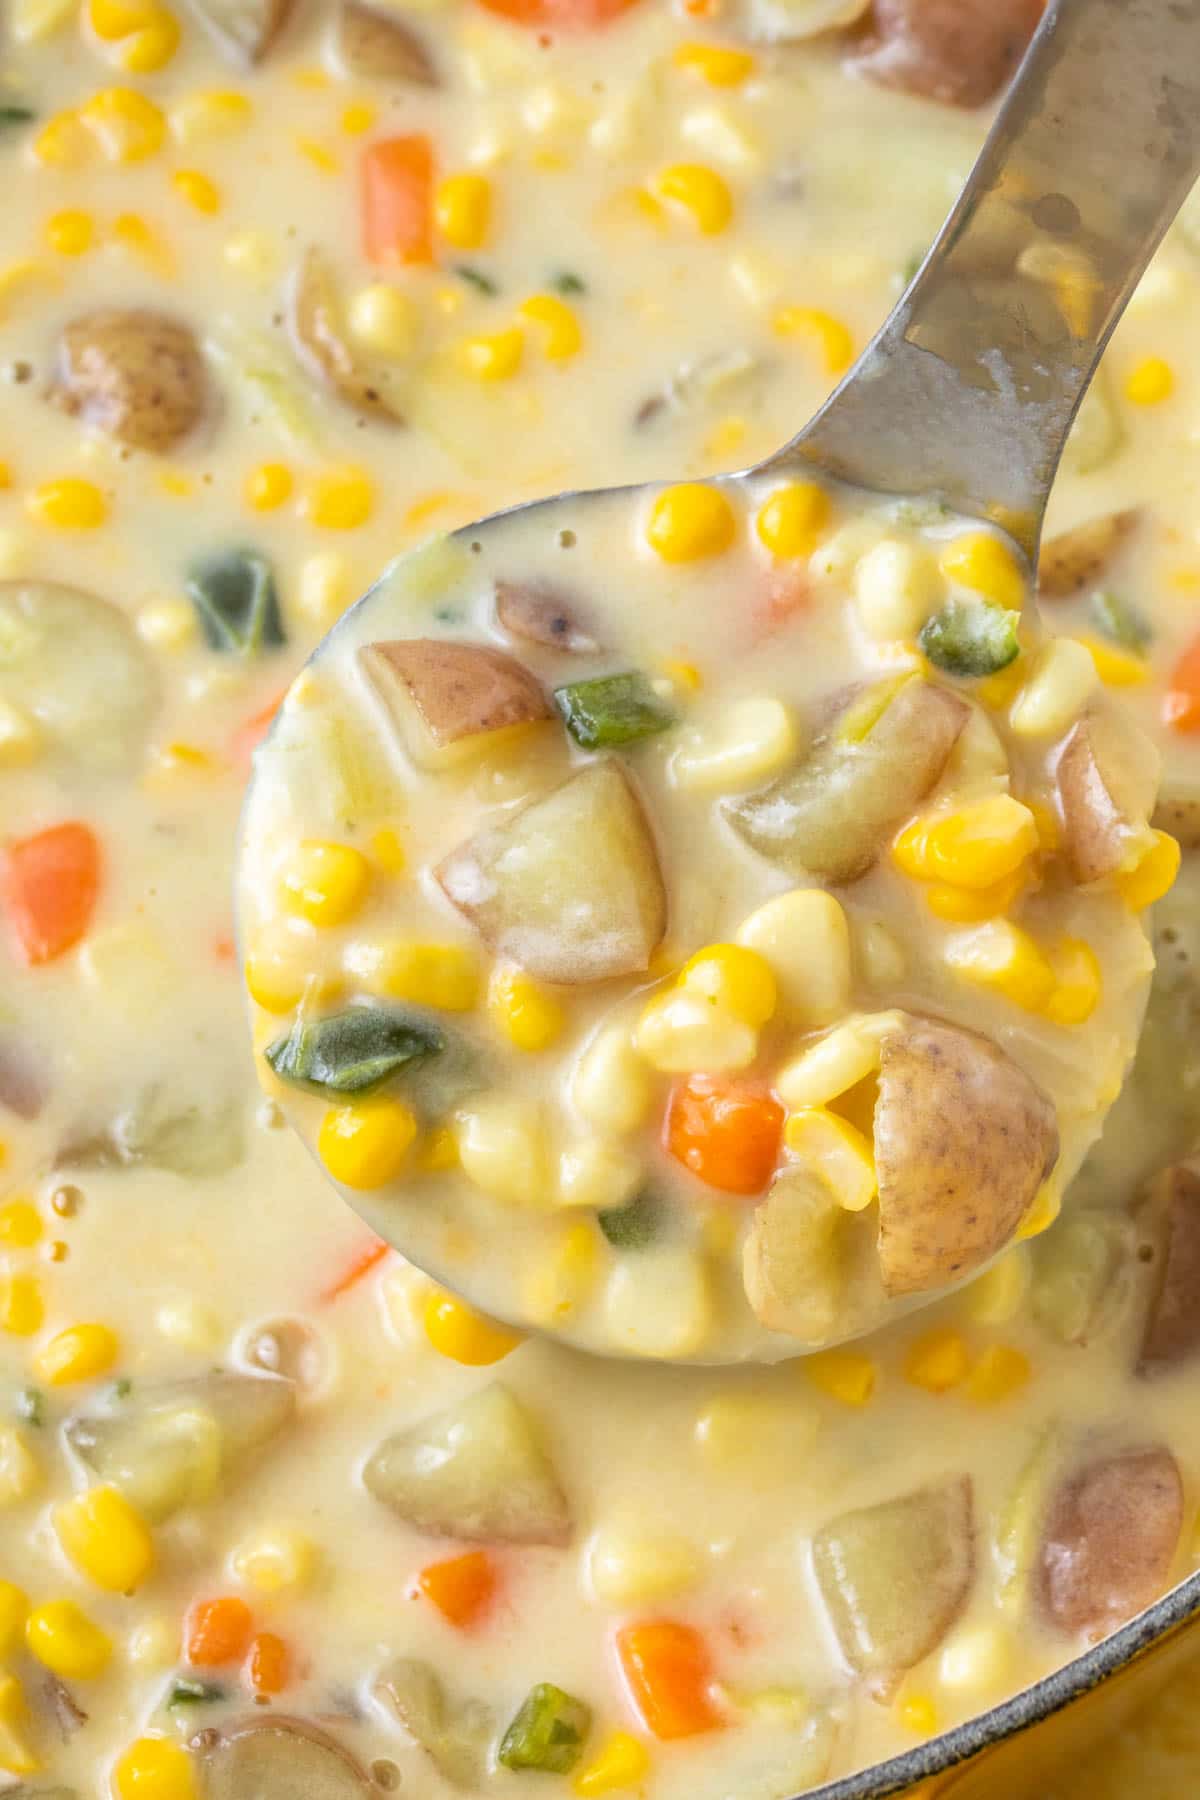 extreme close up view of potato corn chowder in a ladle scoop